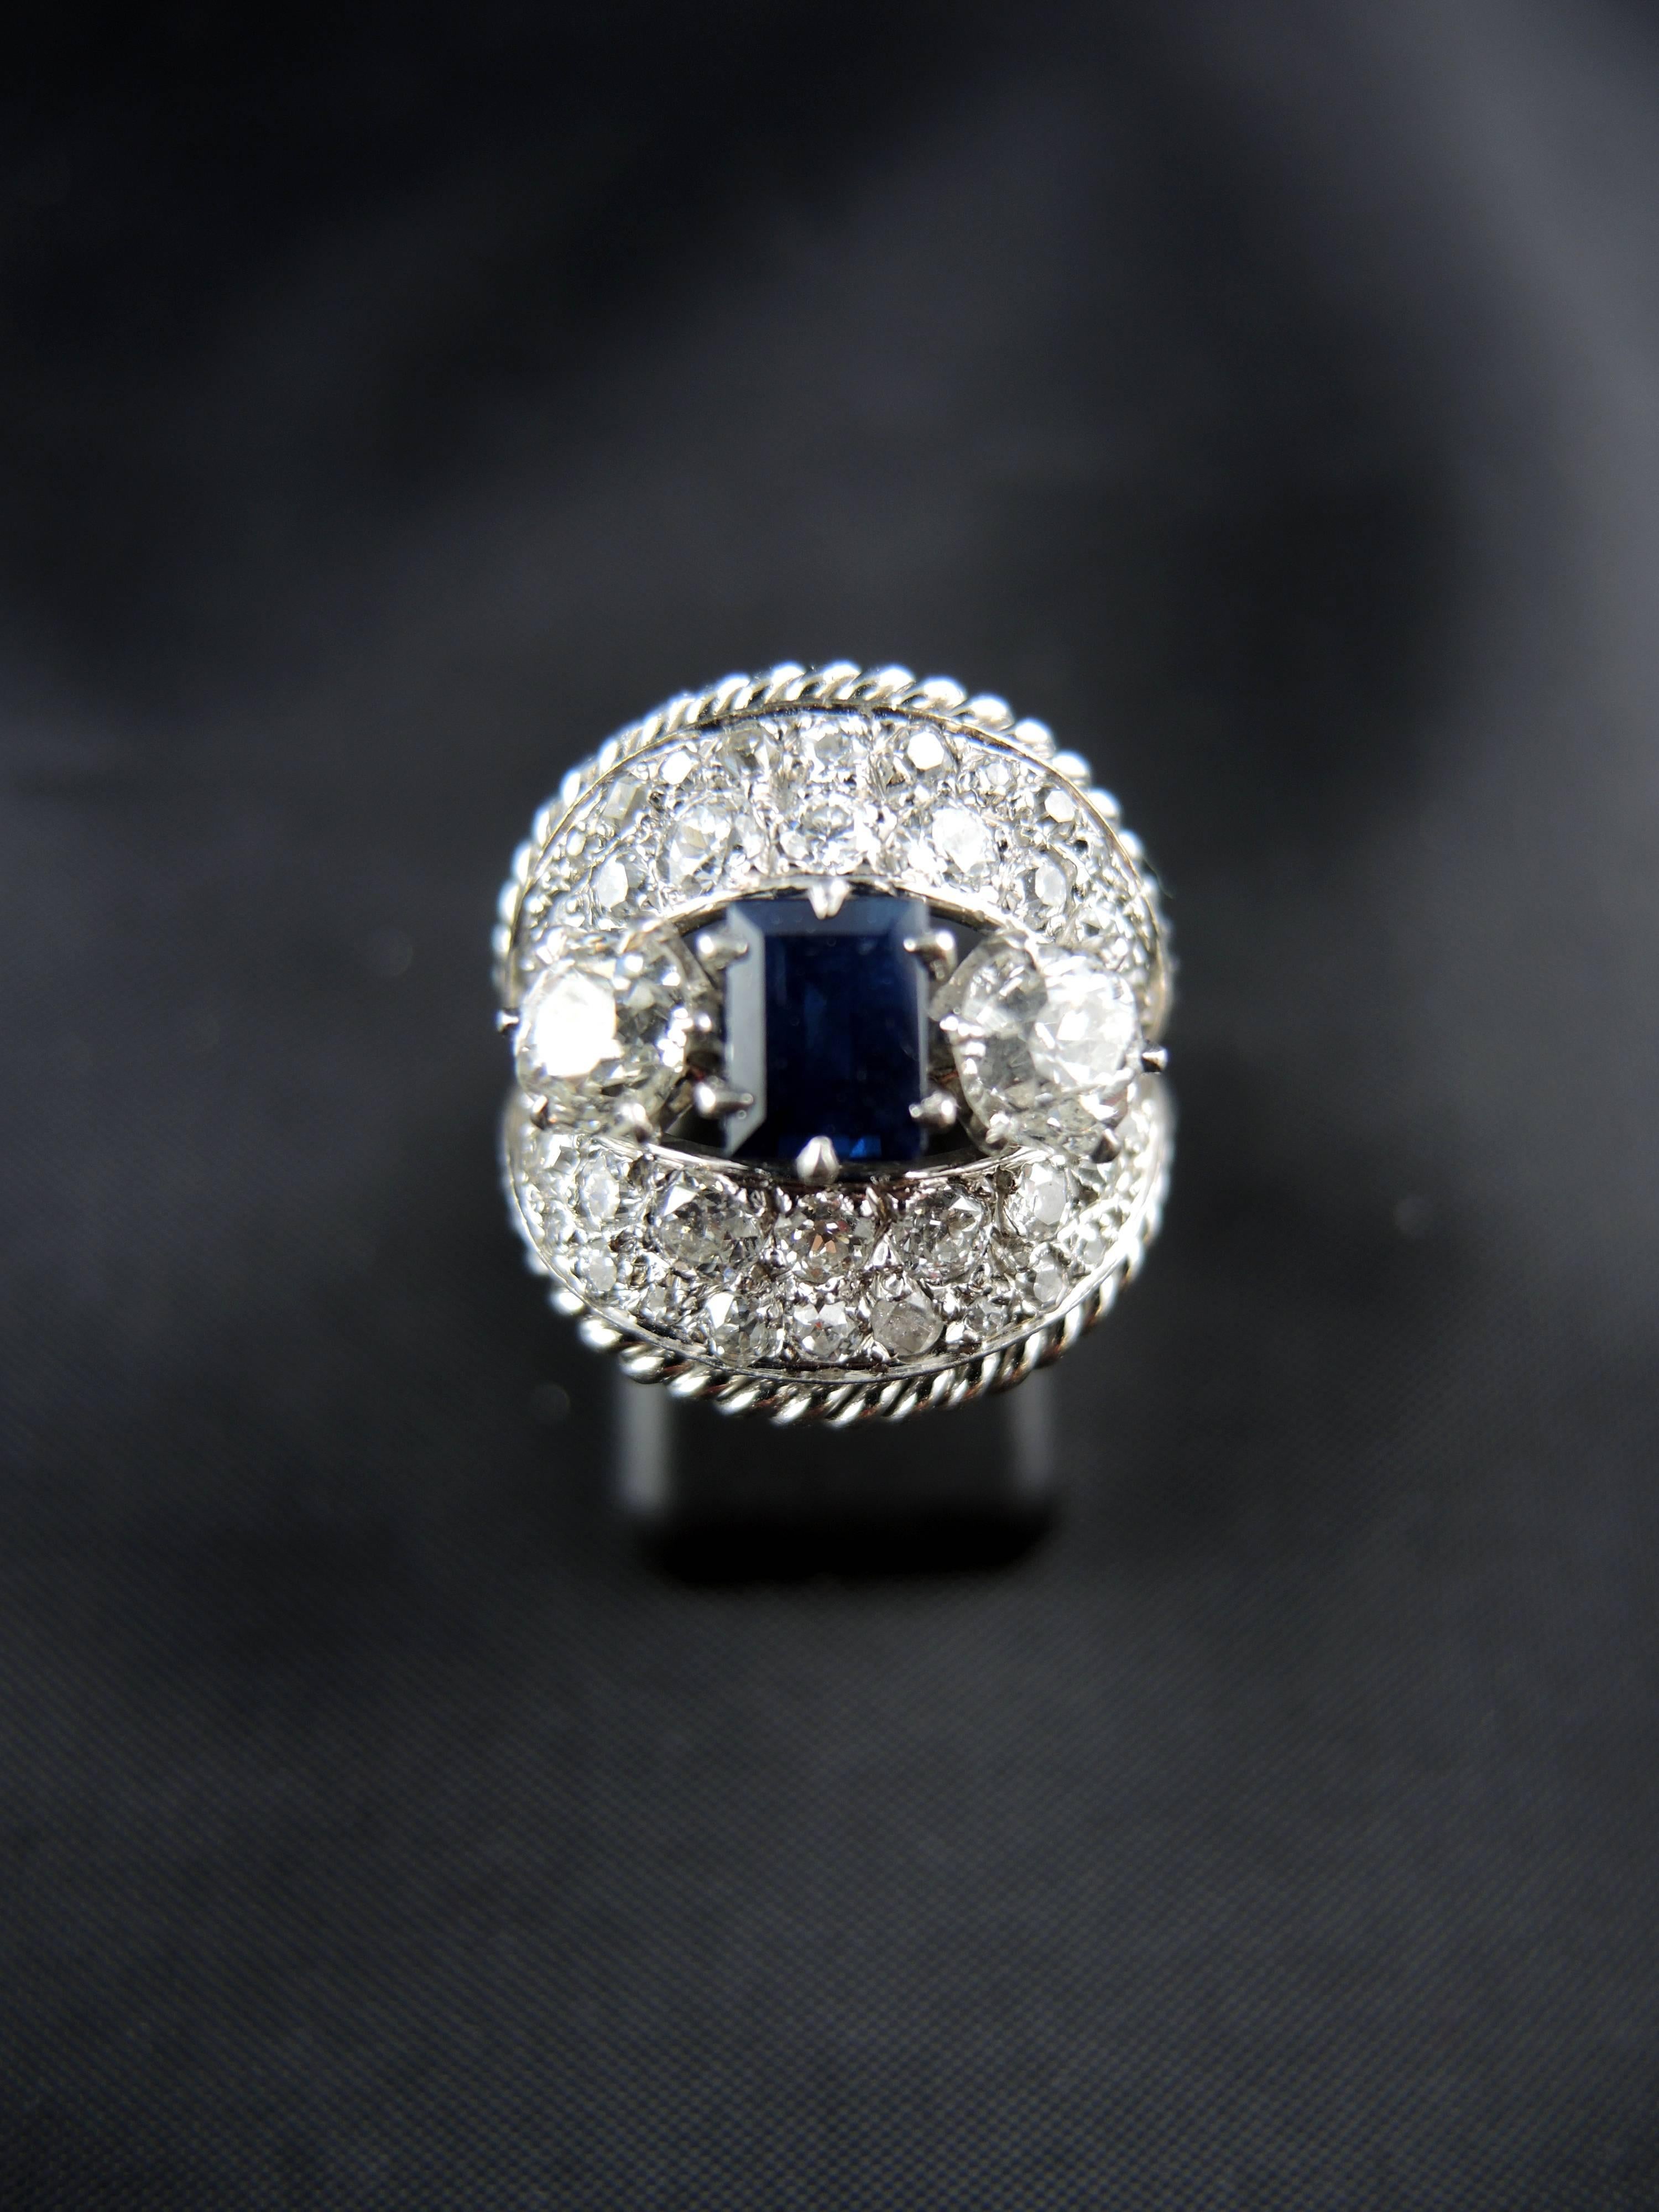 18kt white gold and platinium ring (quality mark: eagle's and dog's head) with a central sapphire, weight around 0,70ct, and old cut diamonds, which total weight is estimated around 1,70ct.
Circa 1960.

Weight: 9,30g
Ring size: 53 (diameter 16,80/